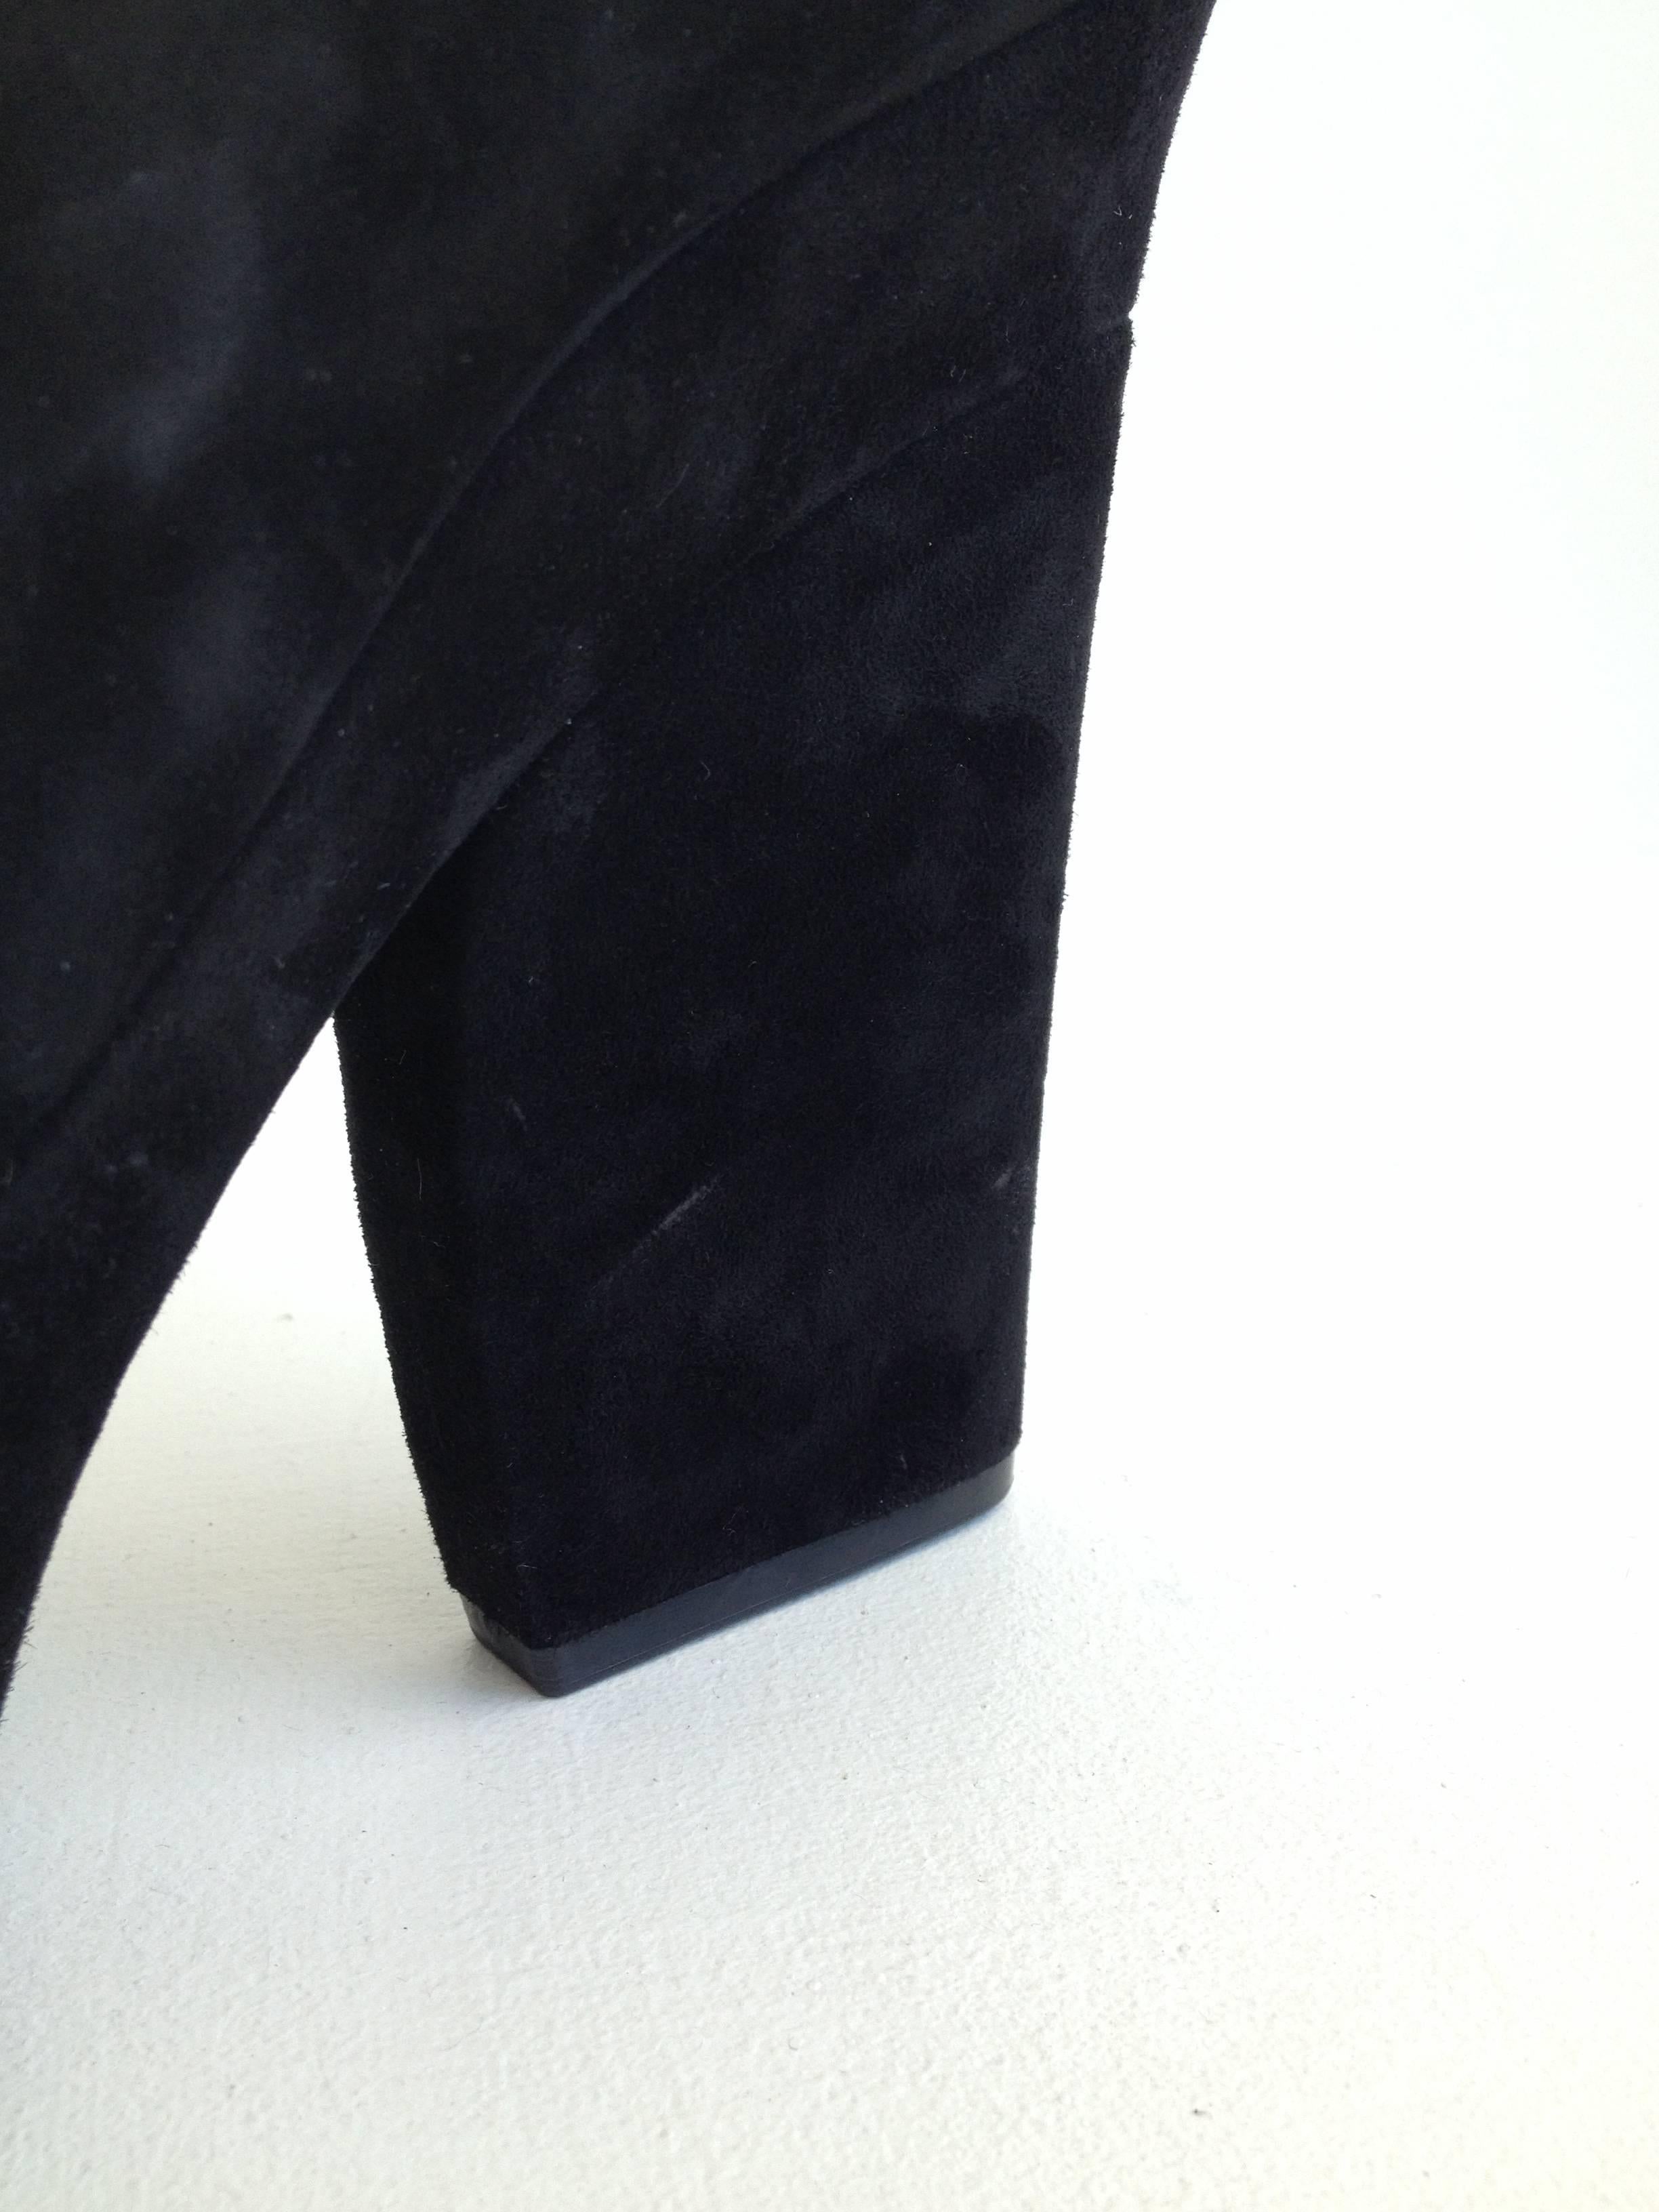 Celine Black Suede Platform Heels with Ankle Strap Size 37 (6.5) In New Condition For Sale In San Francisco, CA